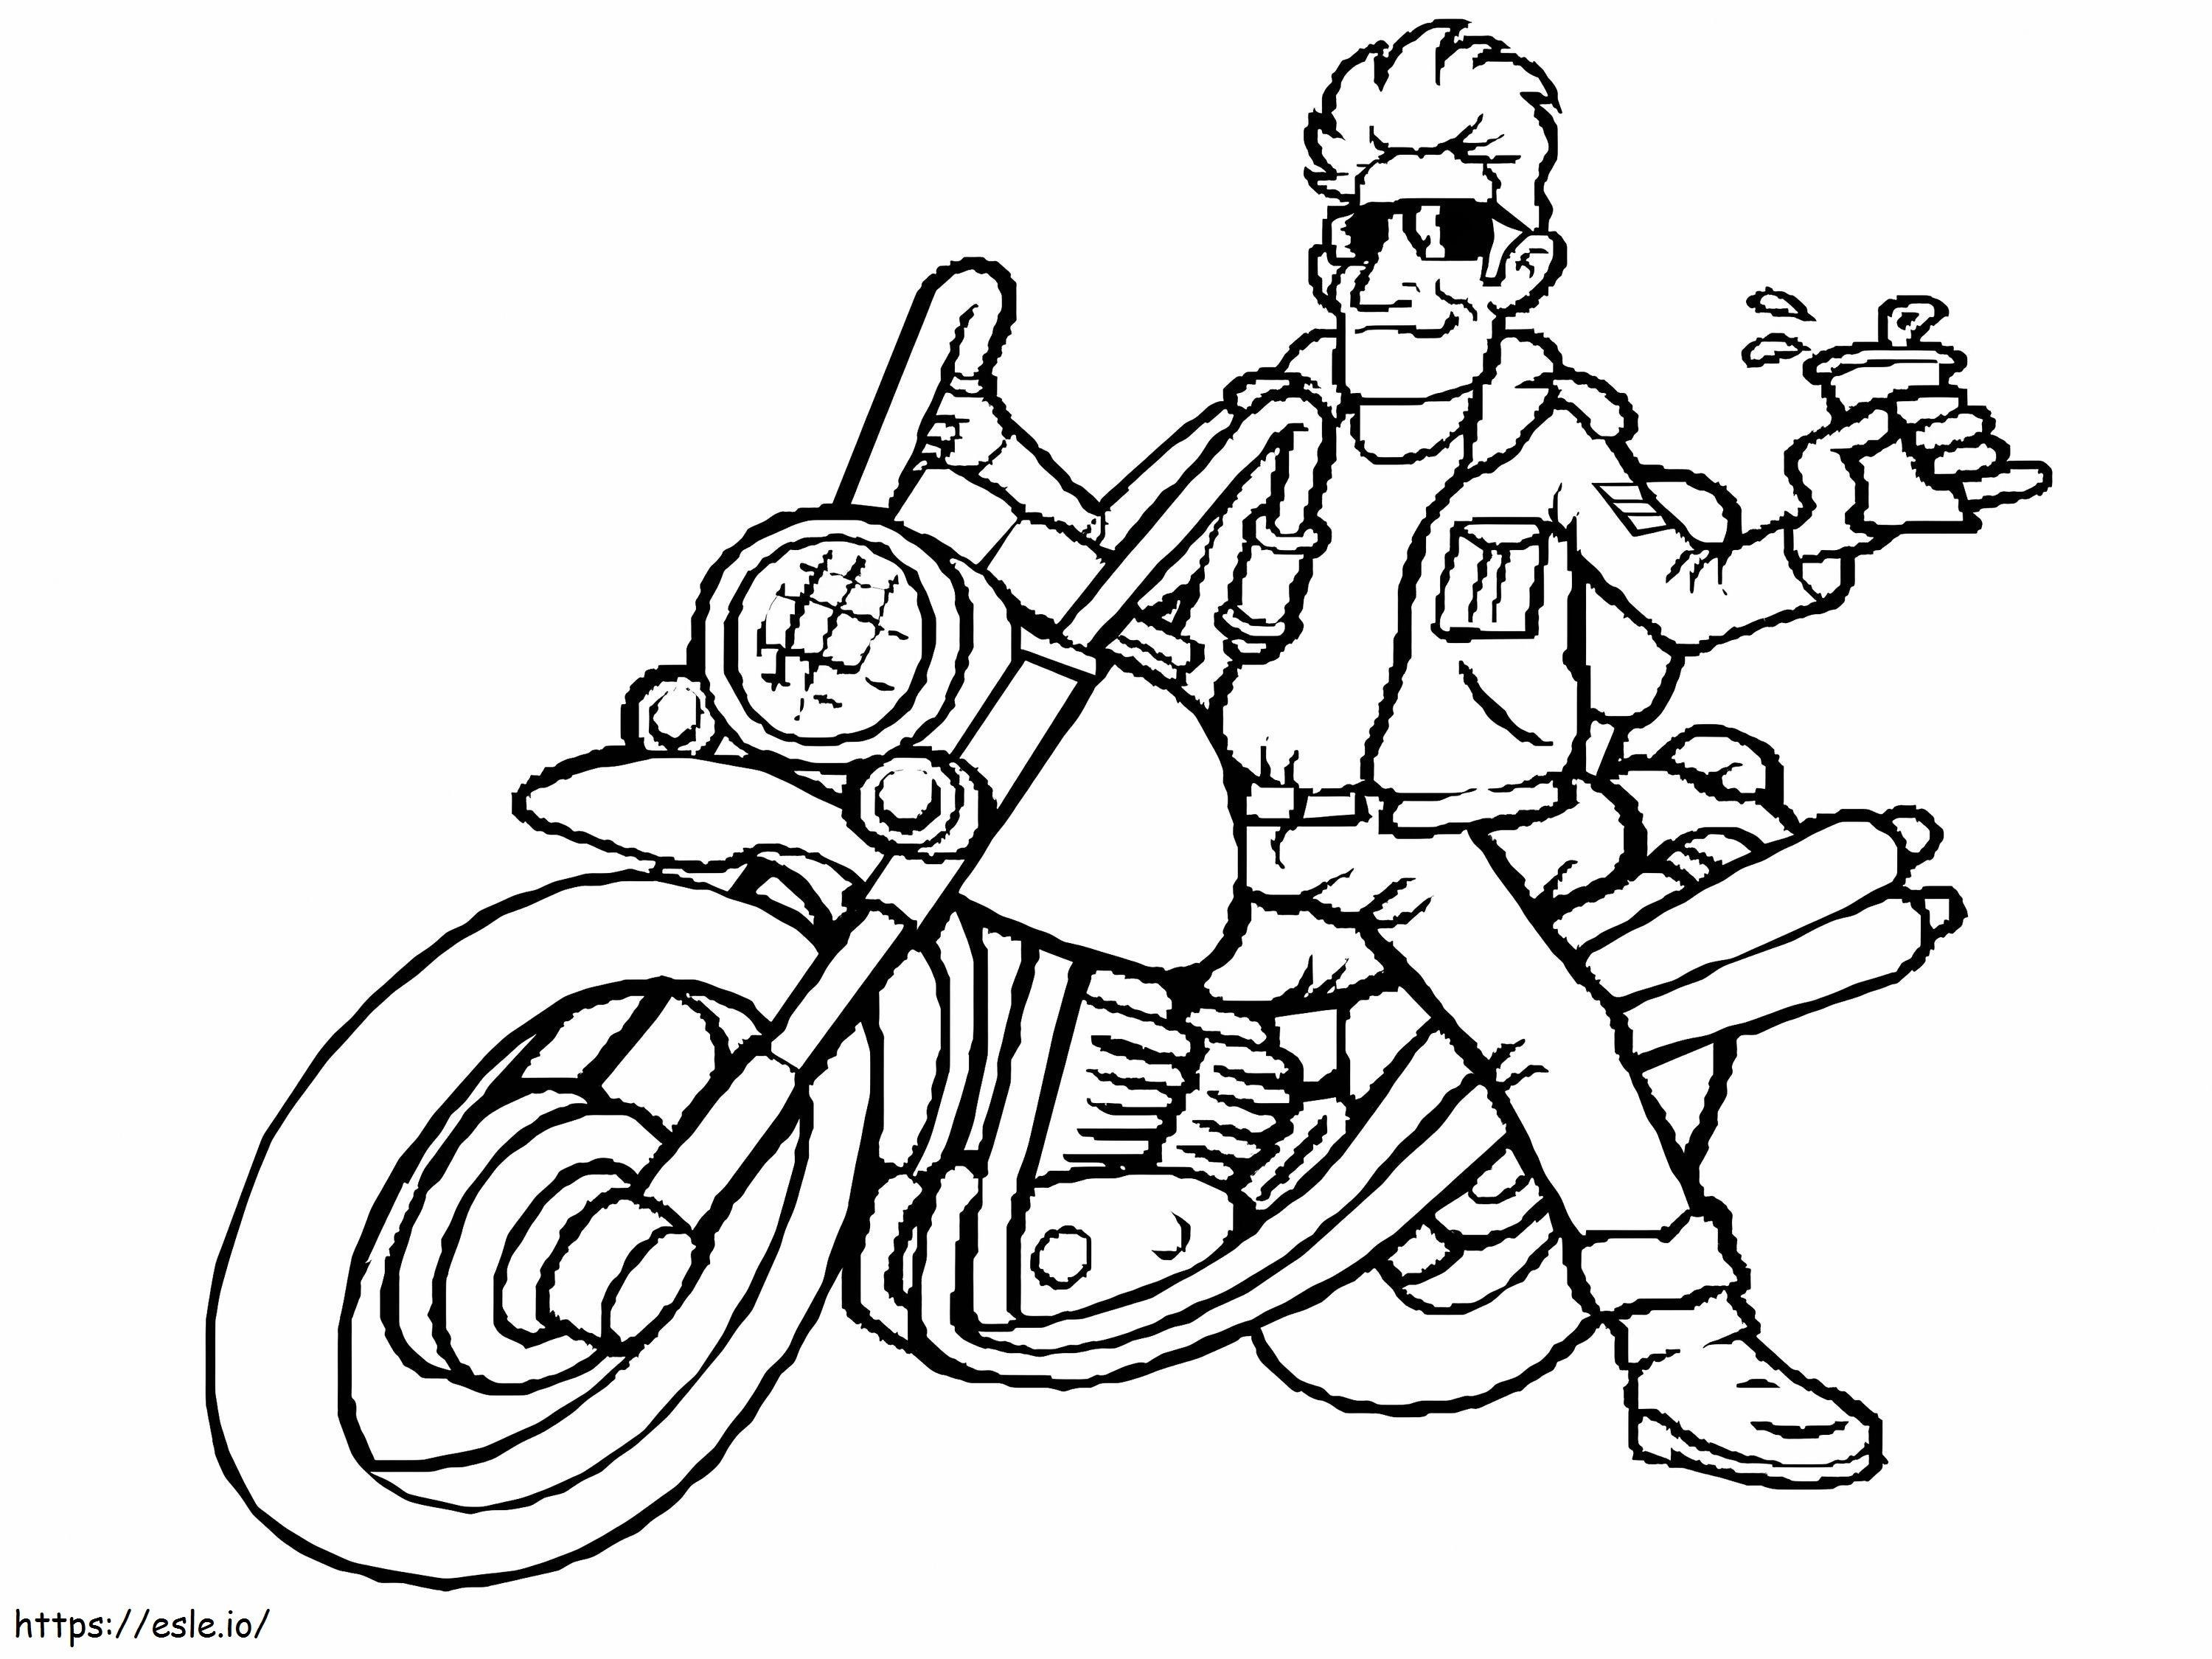 Cool Guy With His Motorcycle coloring page